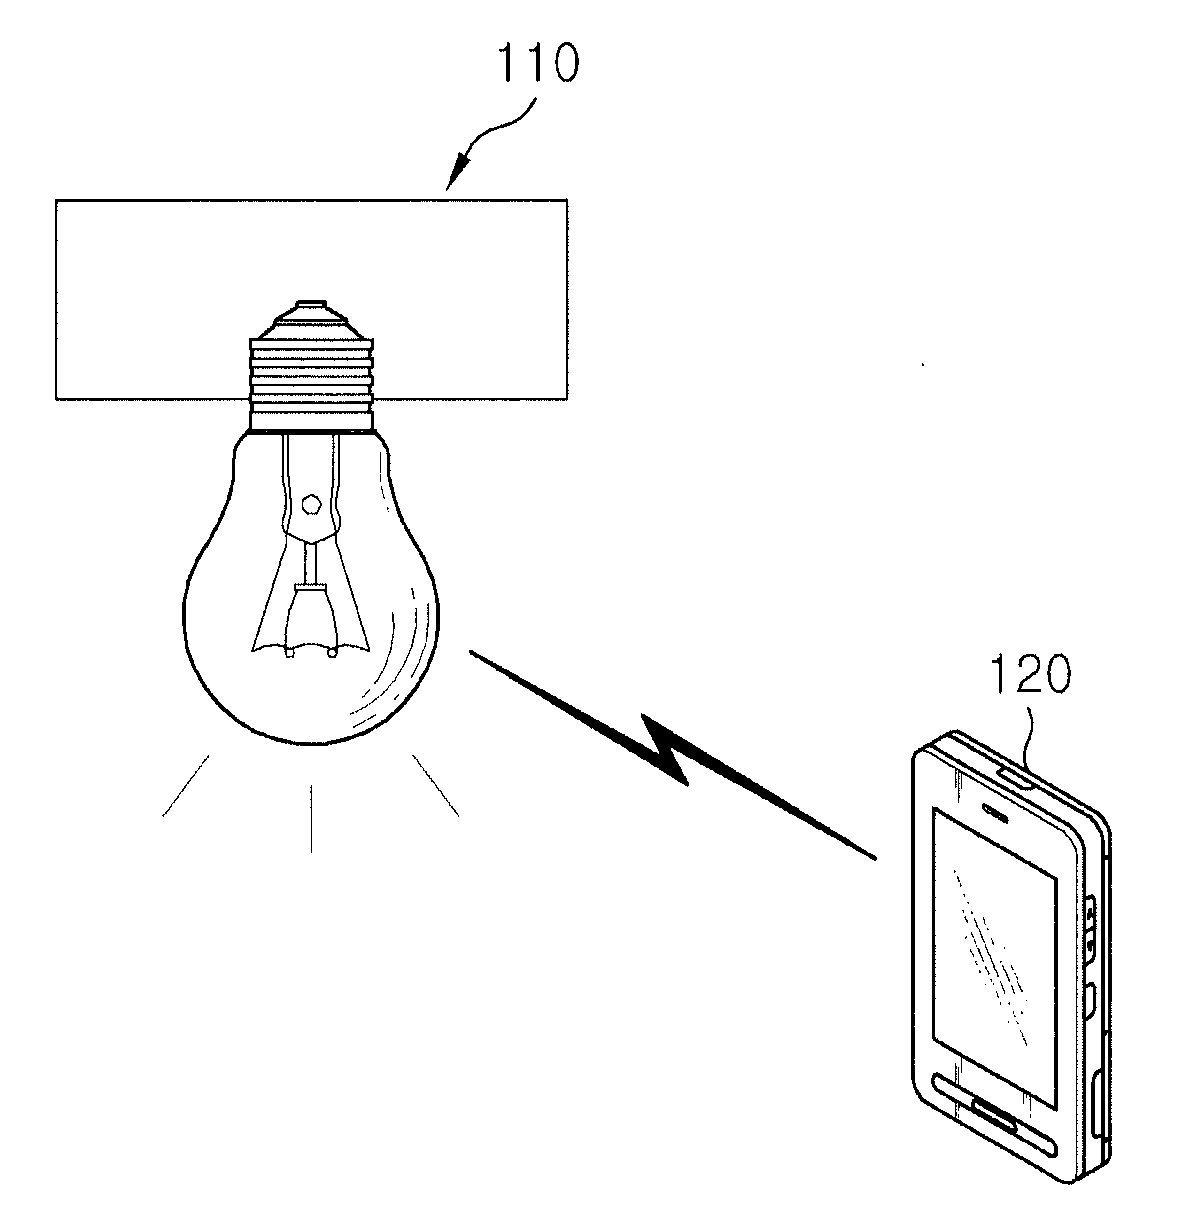 Transmitter, receiver for visible light communication and method using the same